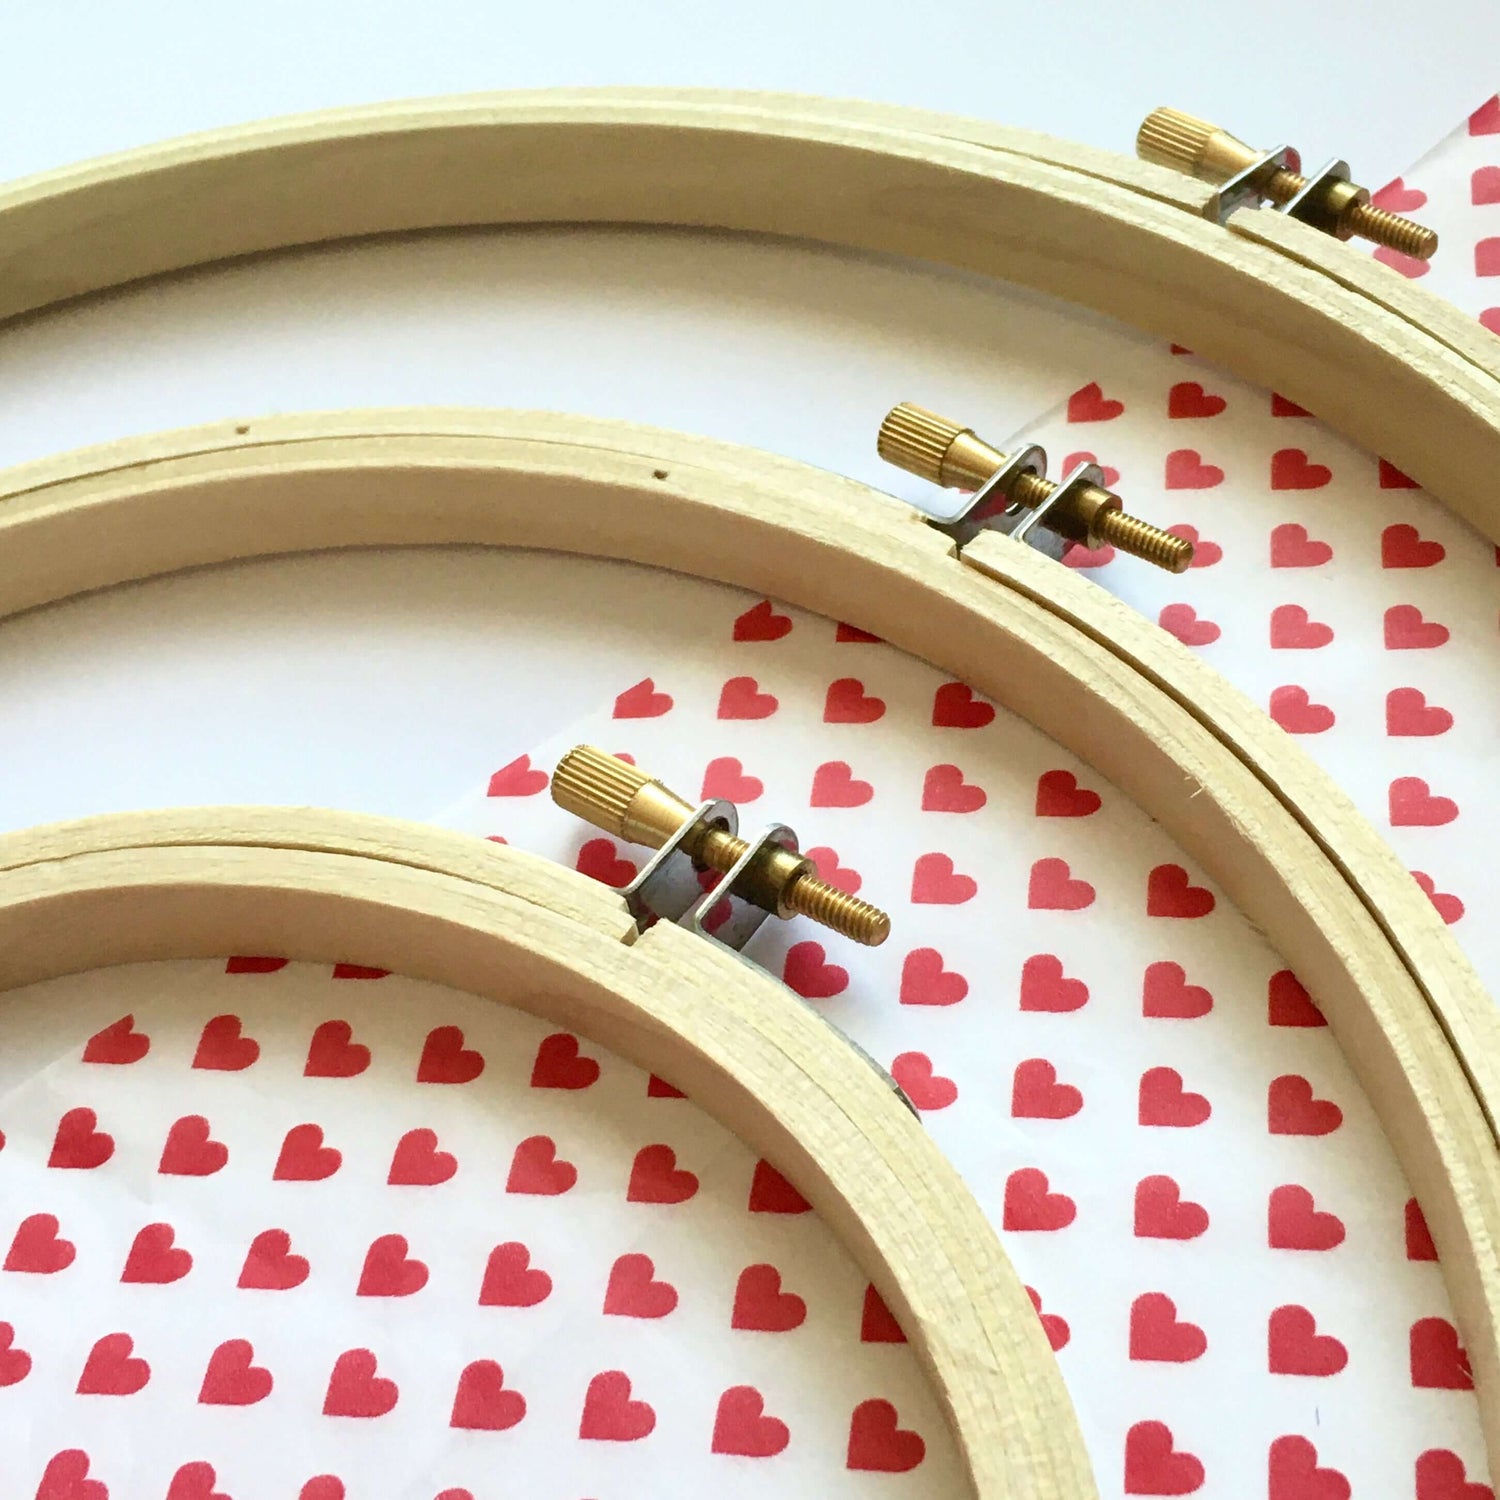 Wooden Embroidery Hoops - Craft Make Do